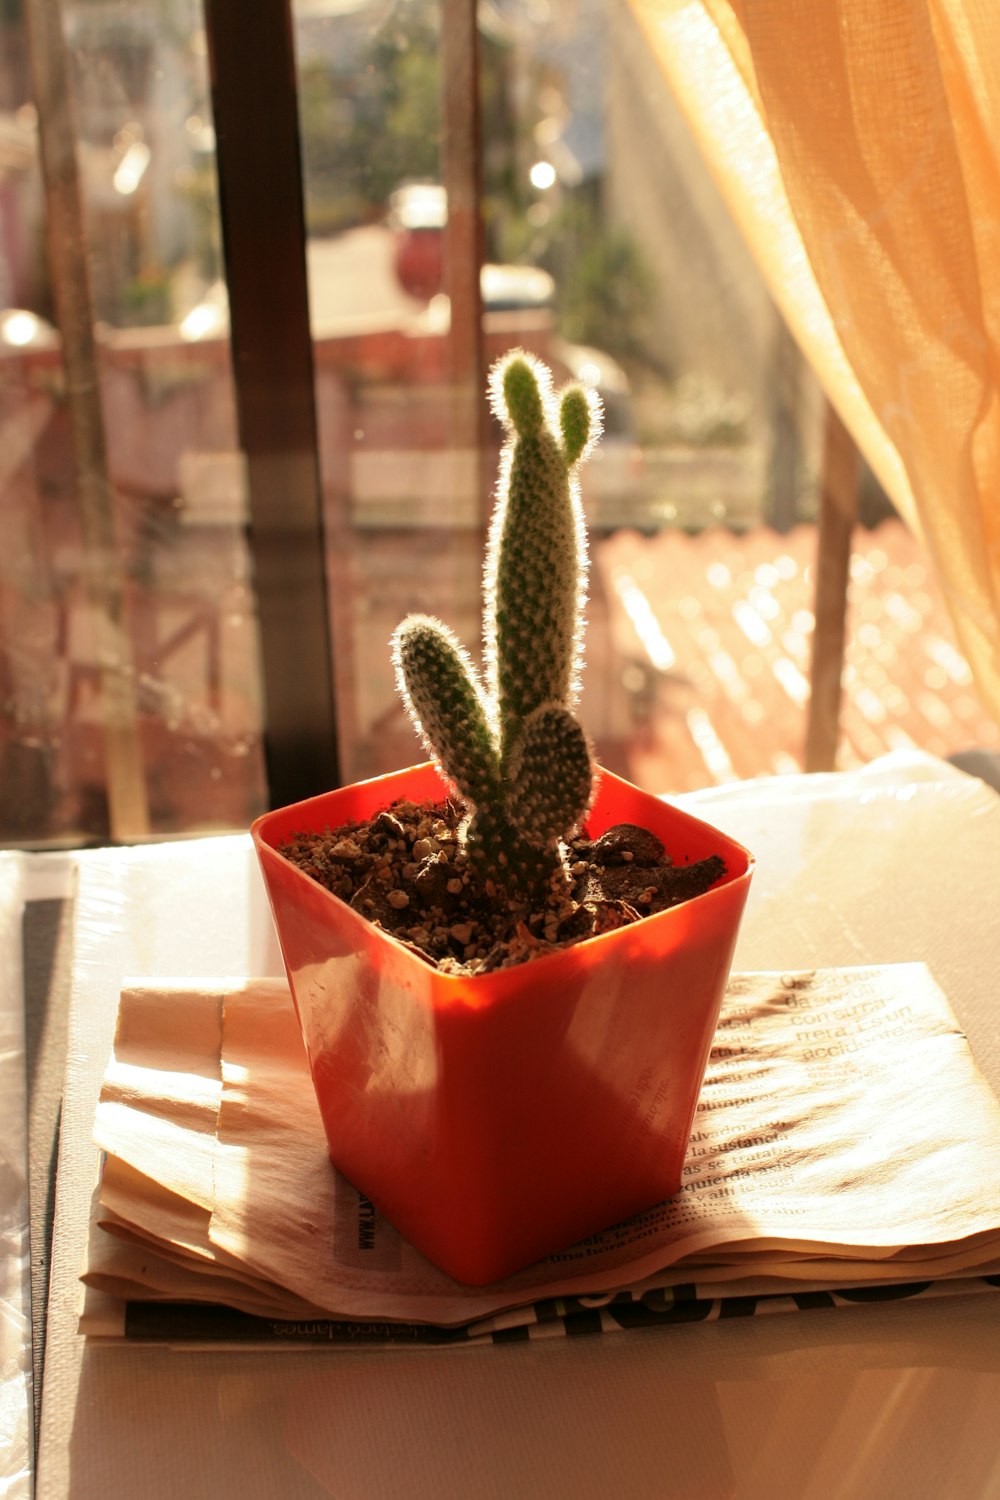 a small cactus in a red pot on a table